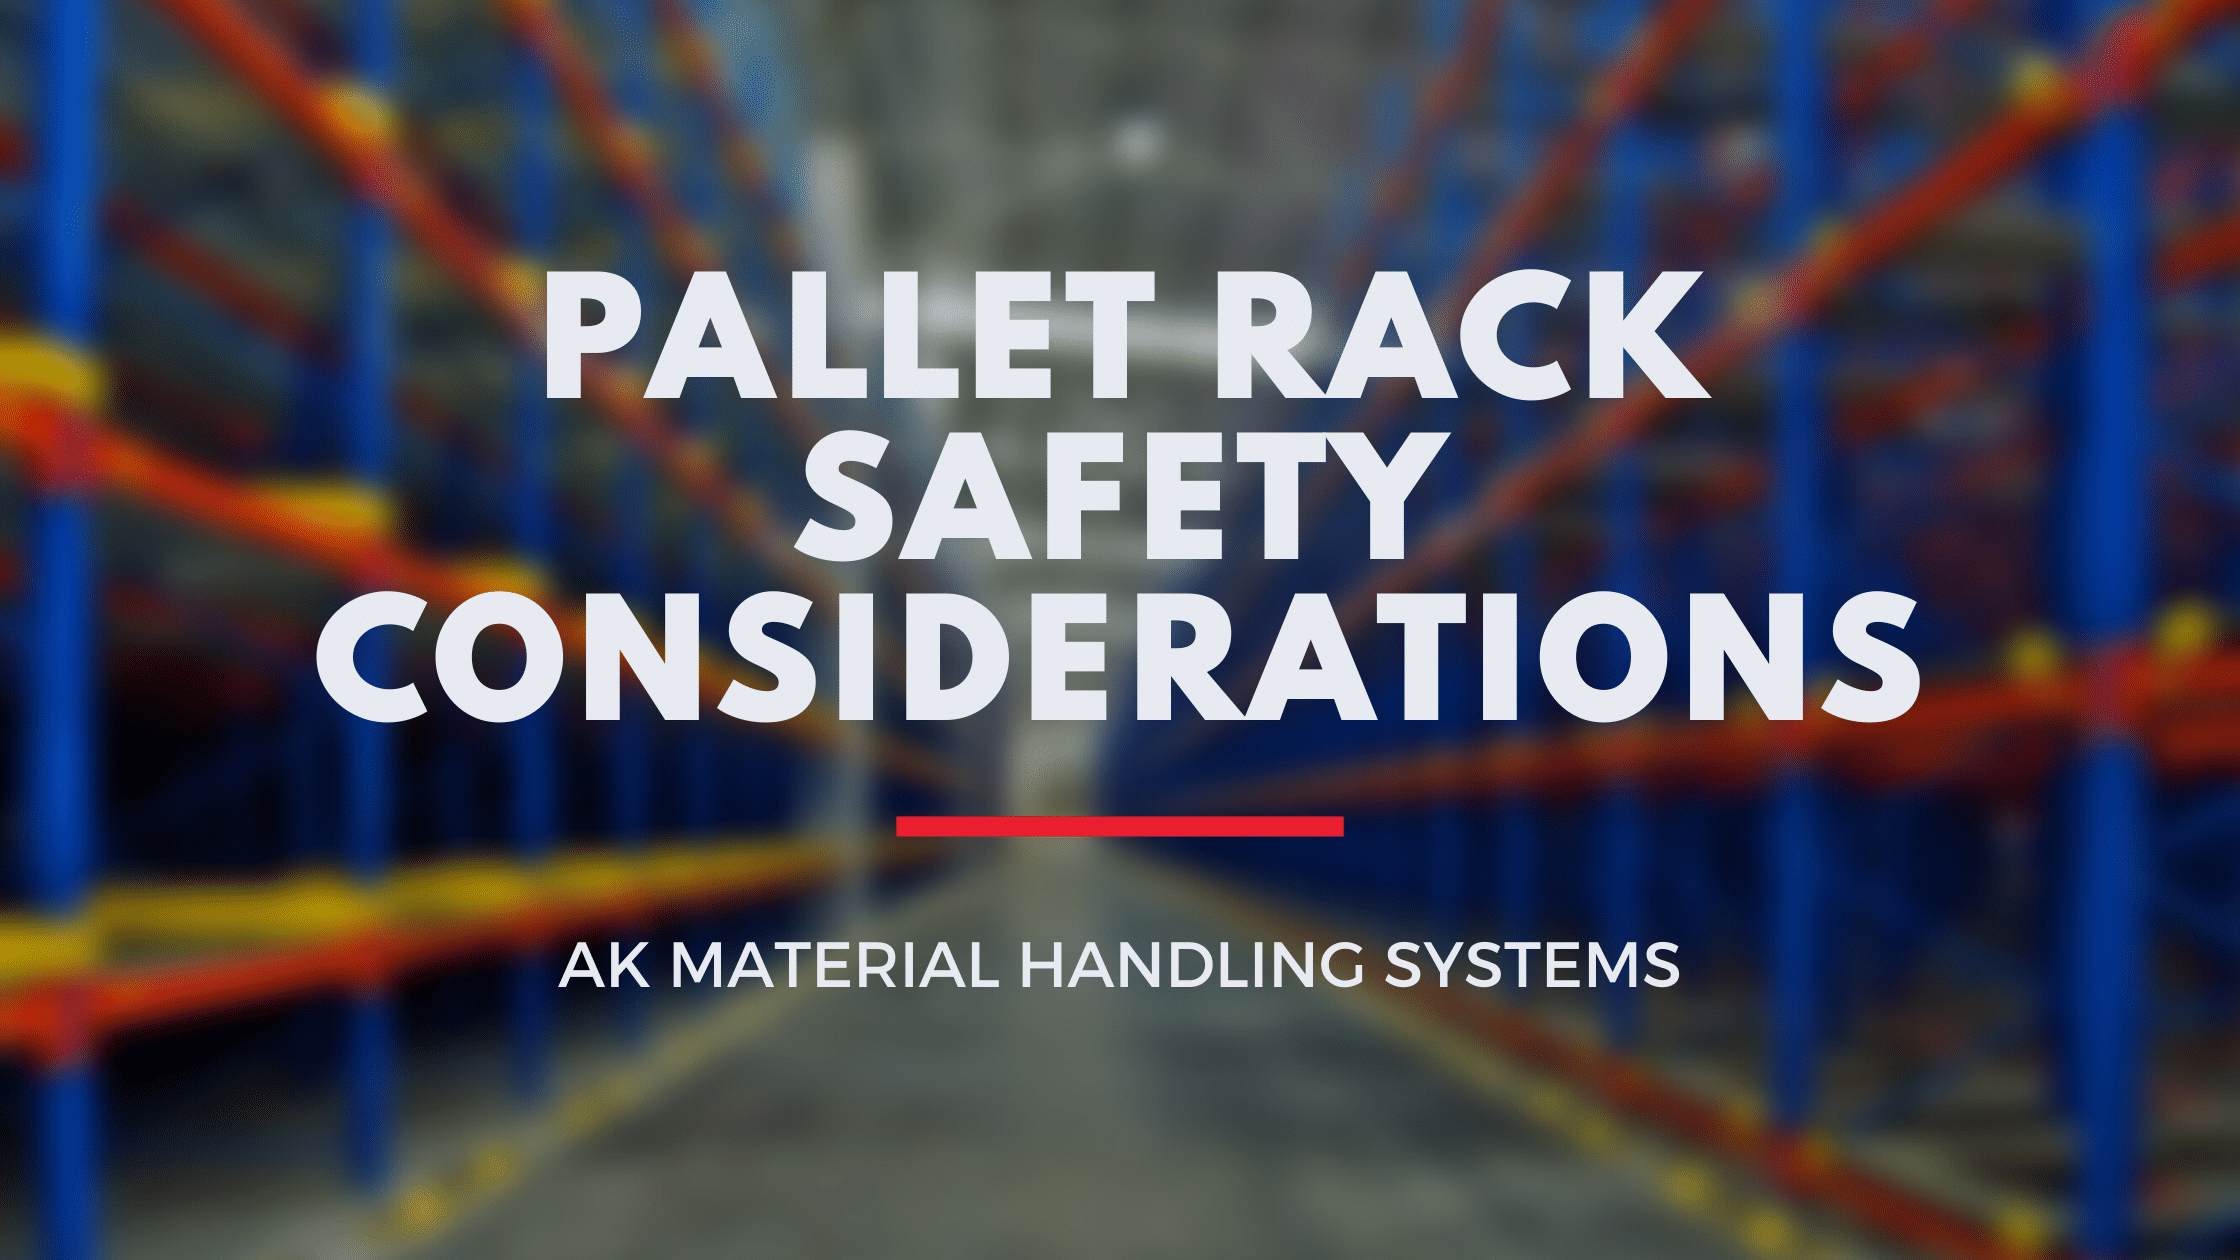 Pallet rack safety considerations.